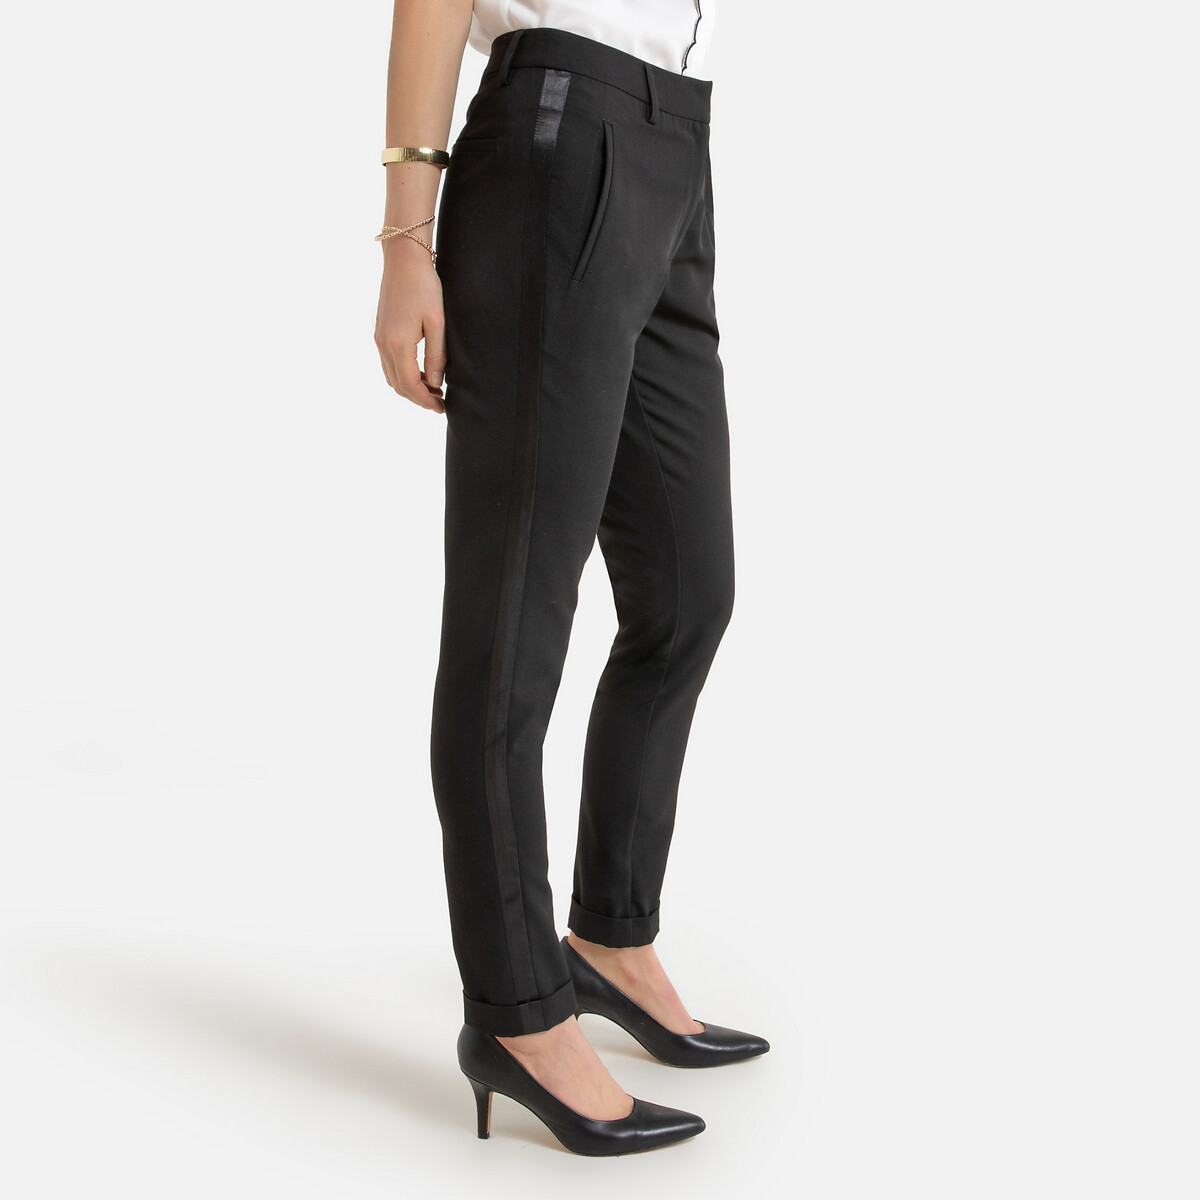 Image of Tuxedo Straight Ankle Grazer Trousers, Length 26.5"